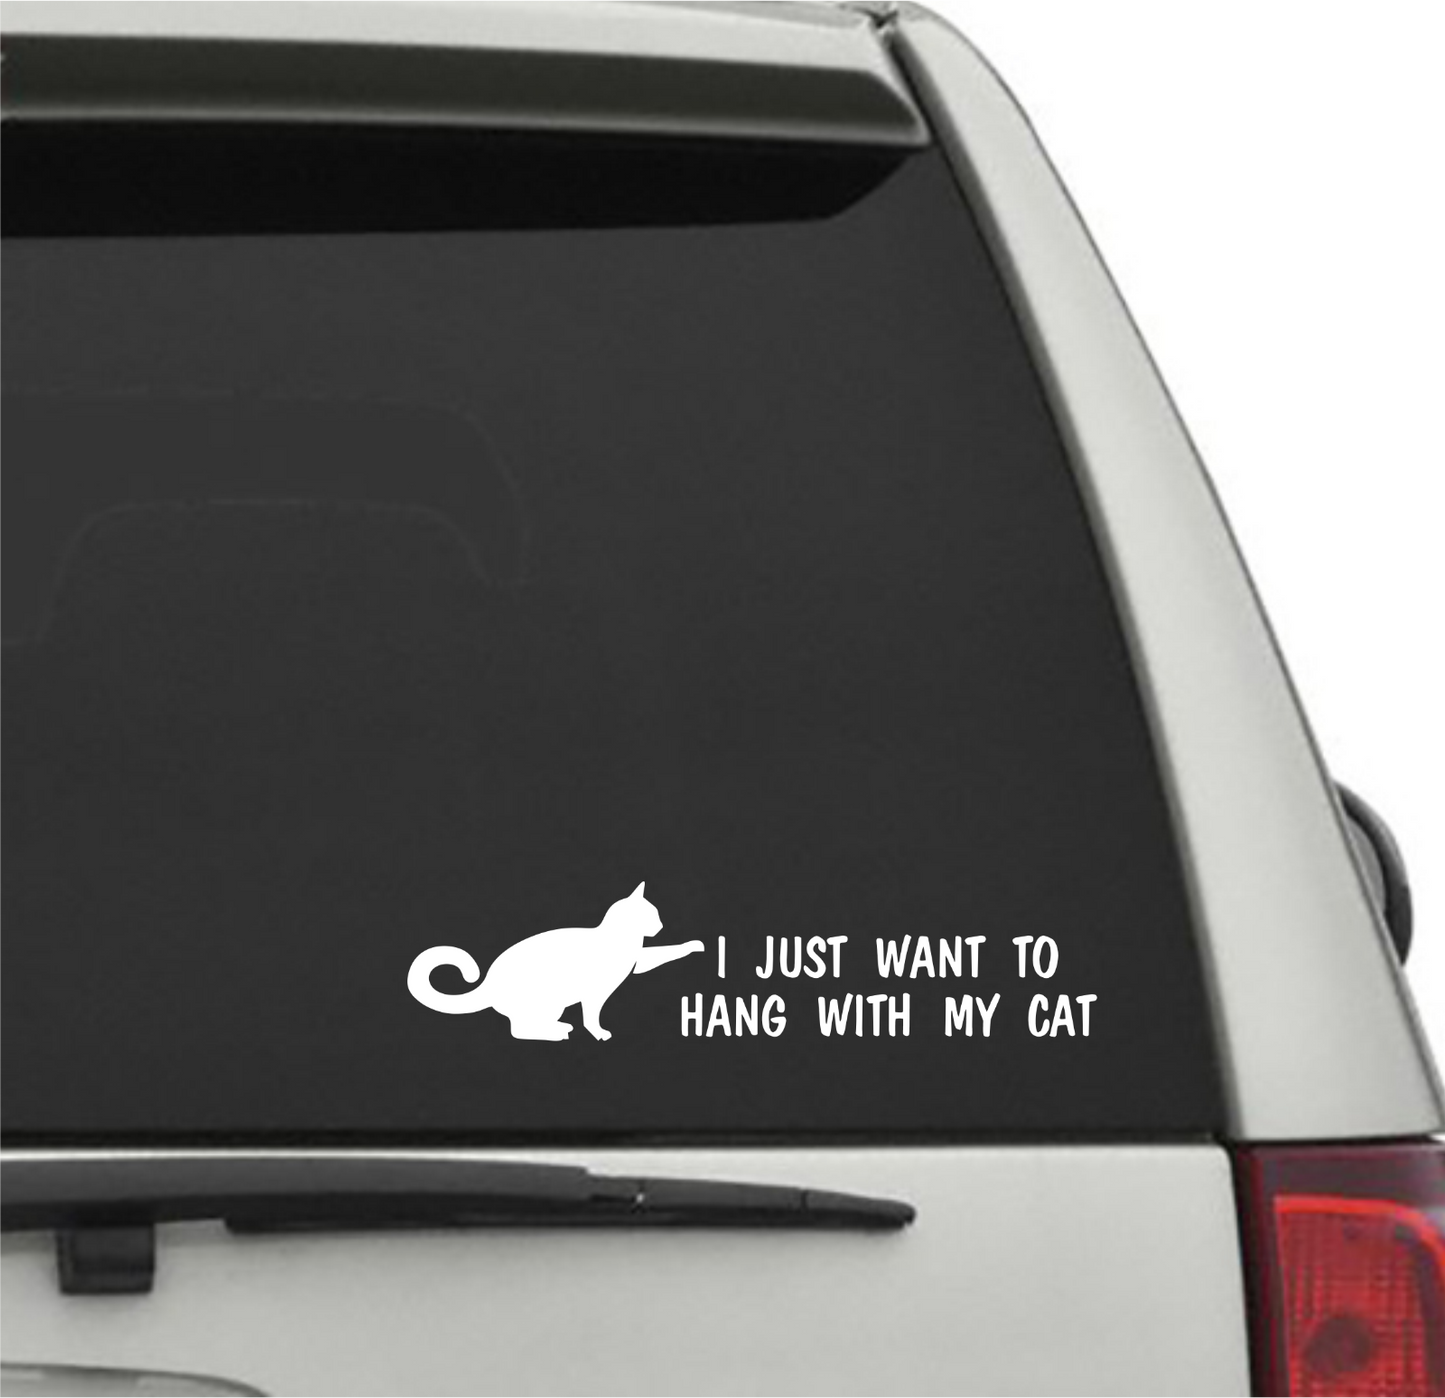 I just Want To Hang With My Cat Pet Lover Vinyl Car Truck Decal Window Vinyl Sticker Vehicle Accessories Car Décor Kitty Stickers